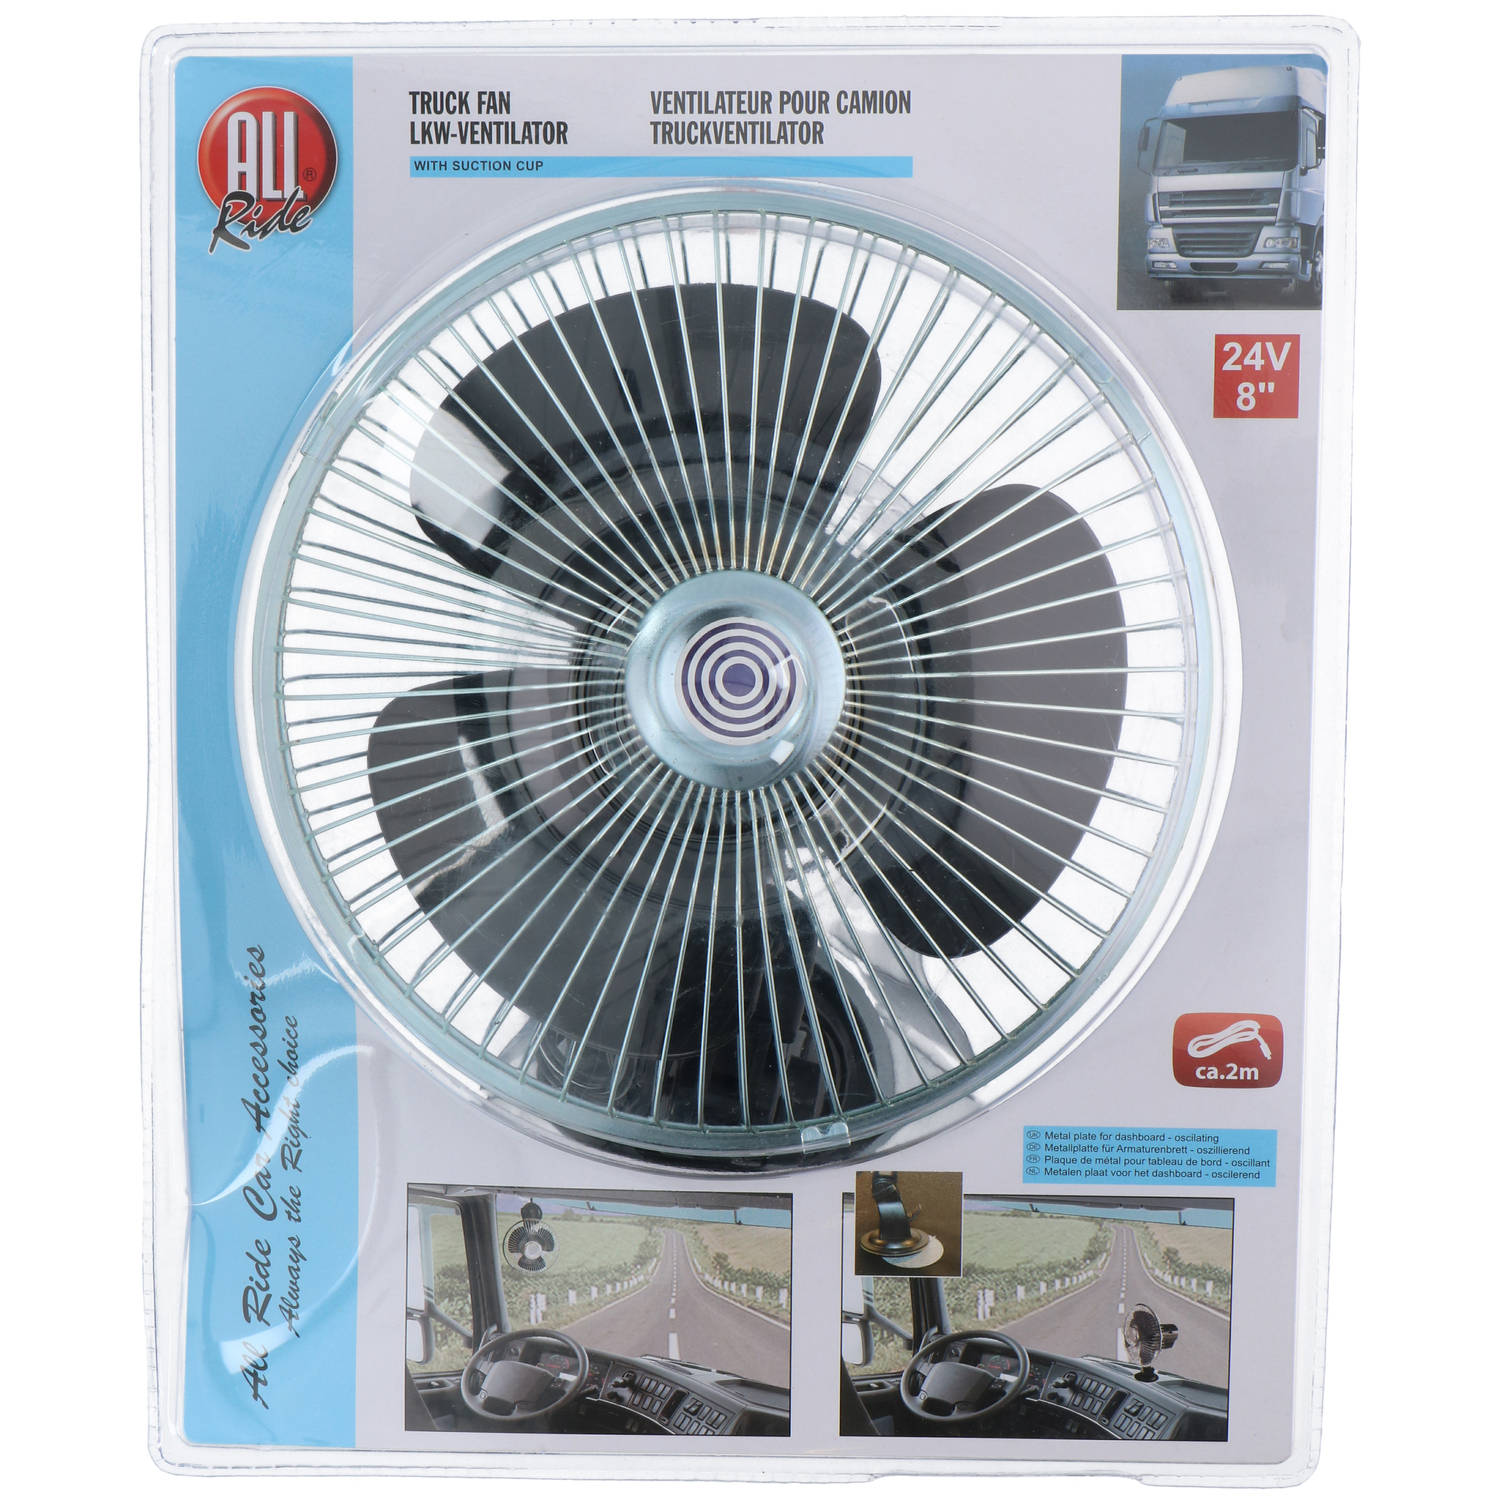 Fan 24V 8inch & suction cup